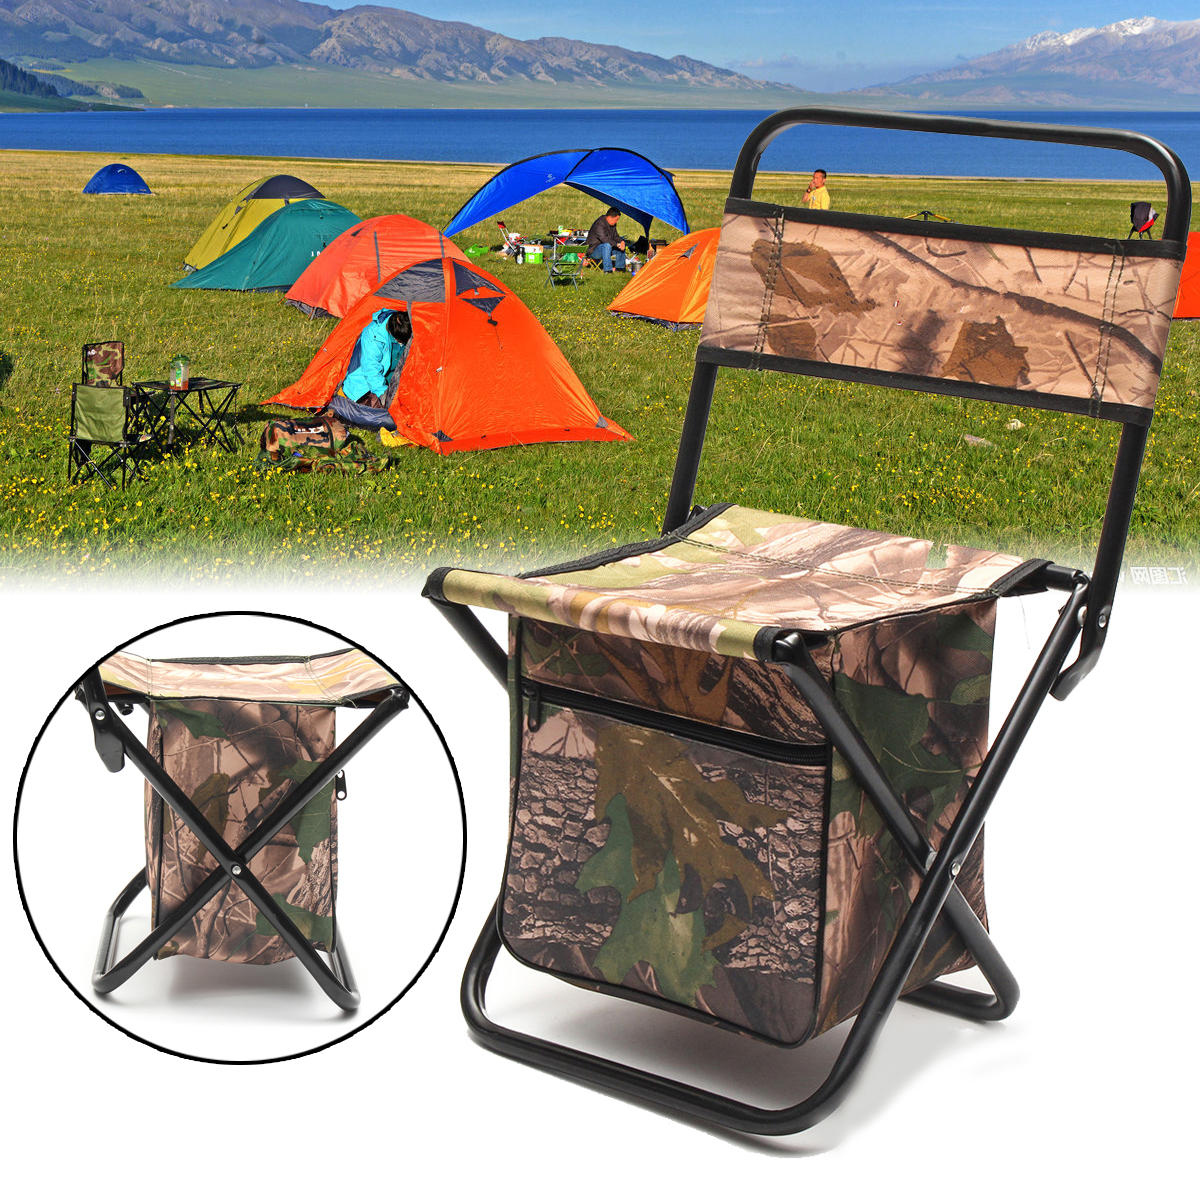 Outdoor Camping Folding Chair Portable Durable With Storage Bag Fishing Hiking Picnic Chair